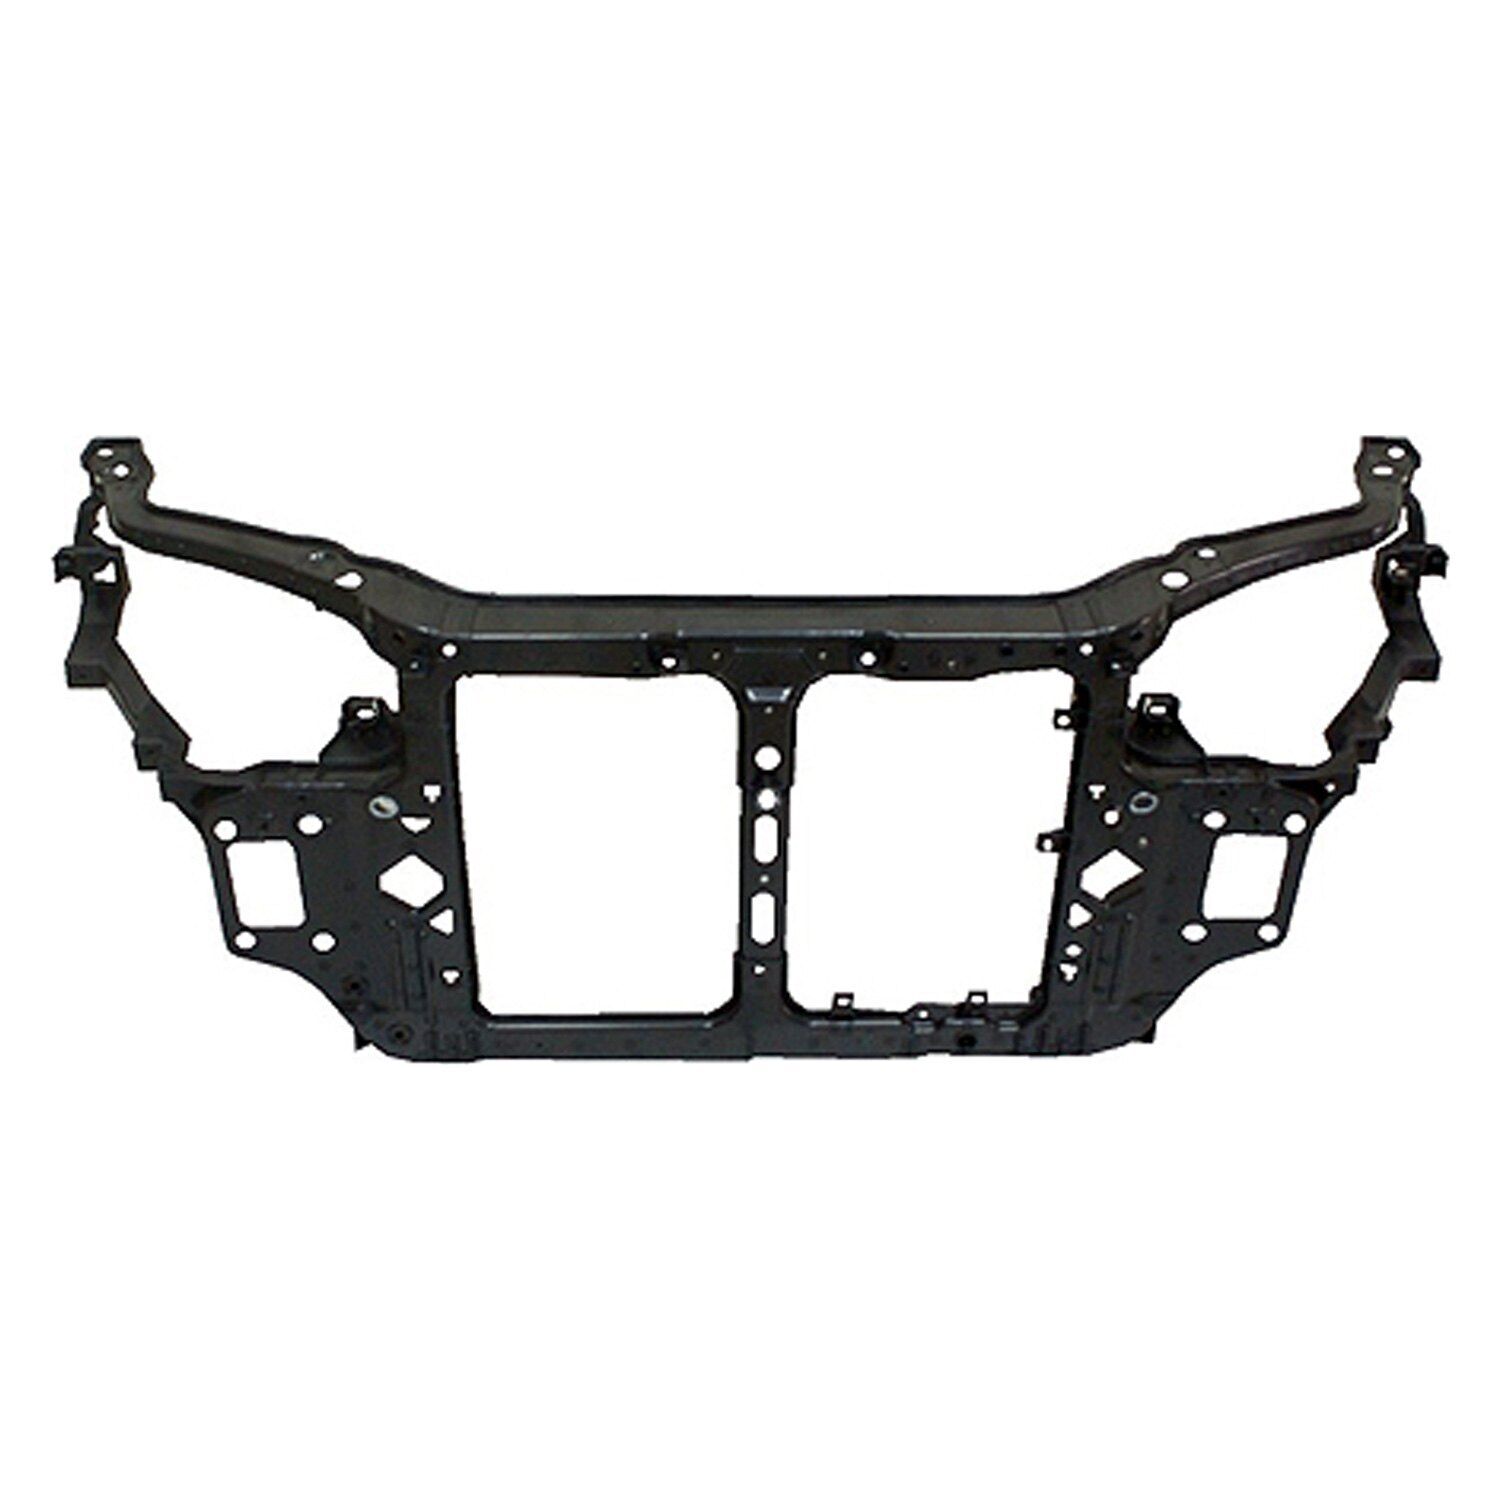 For Kia Forte 2010-2012 Sherman 3242A-49A-0 Front Radiator Support Value Line